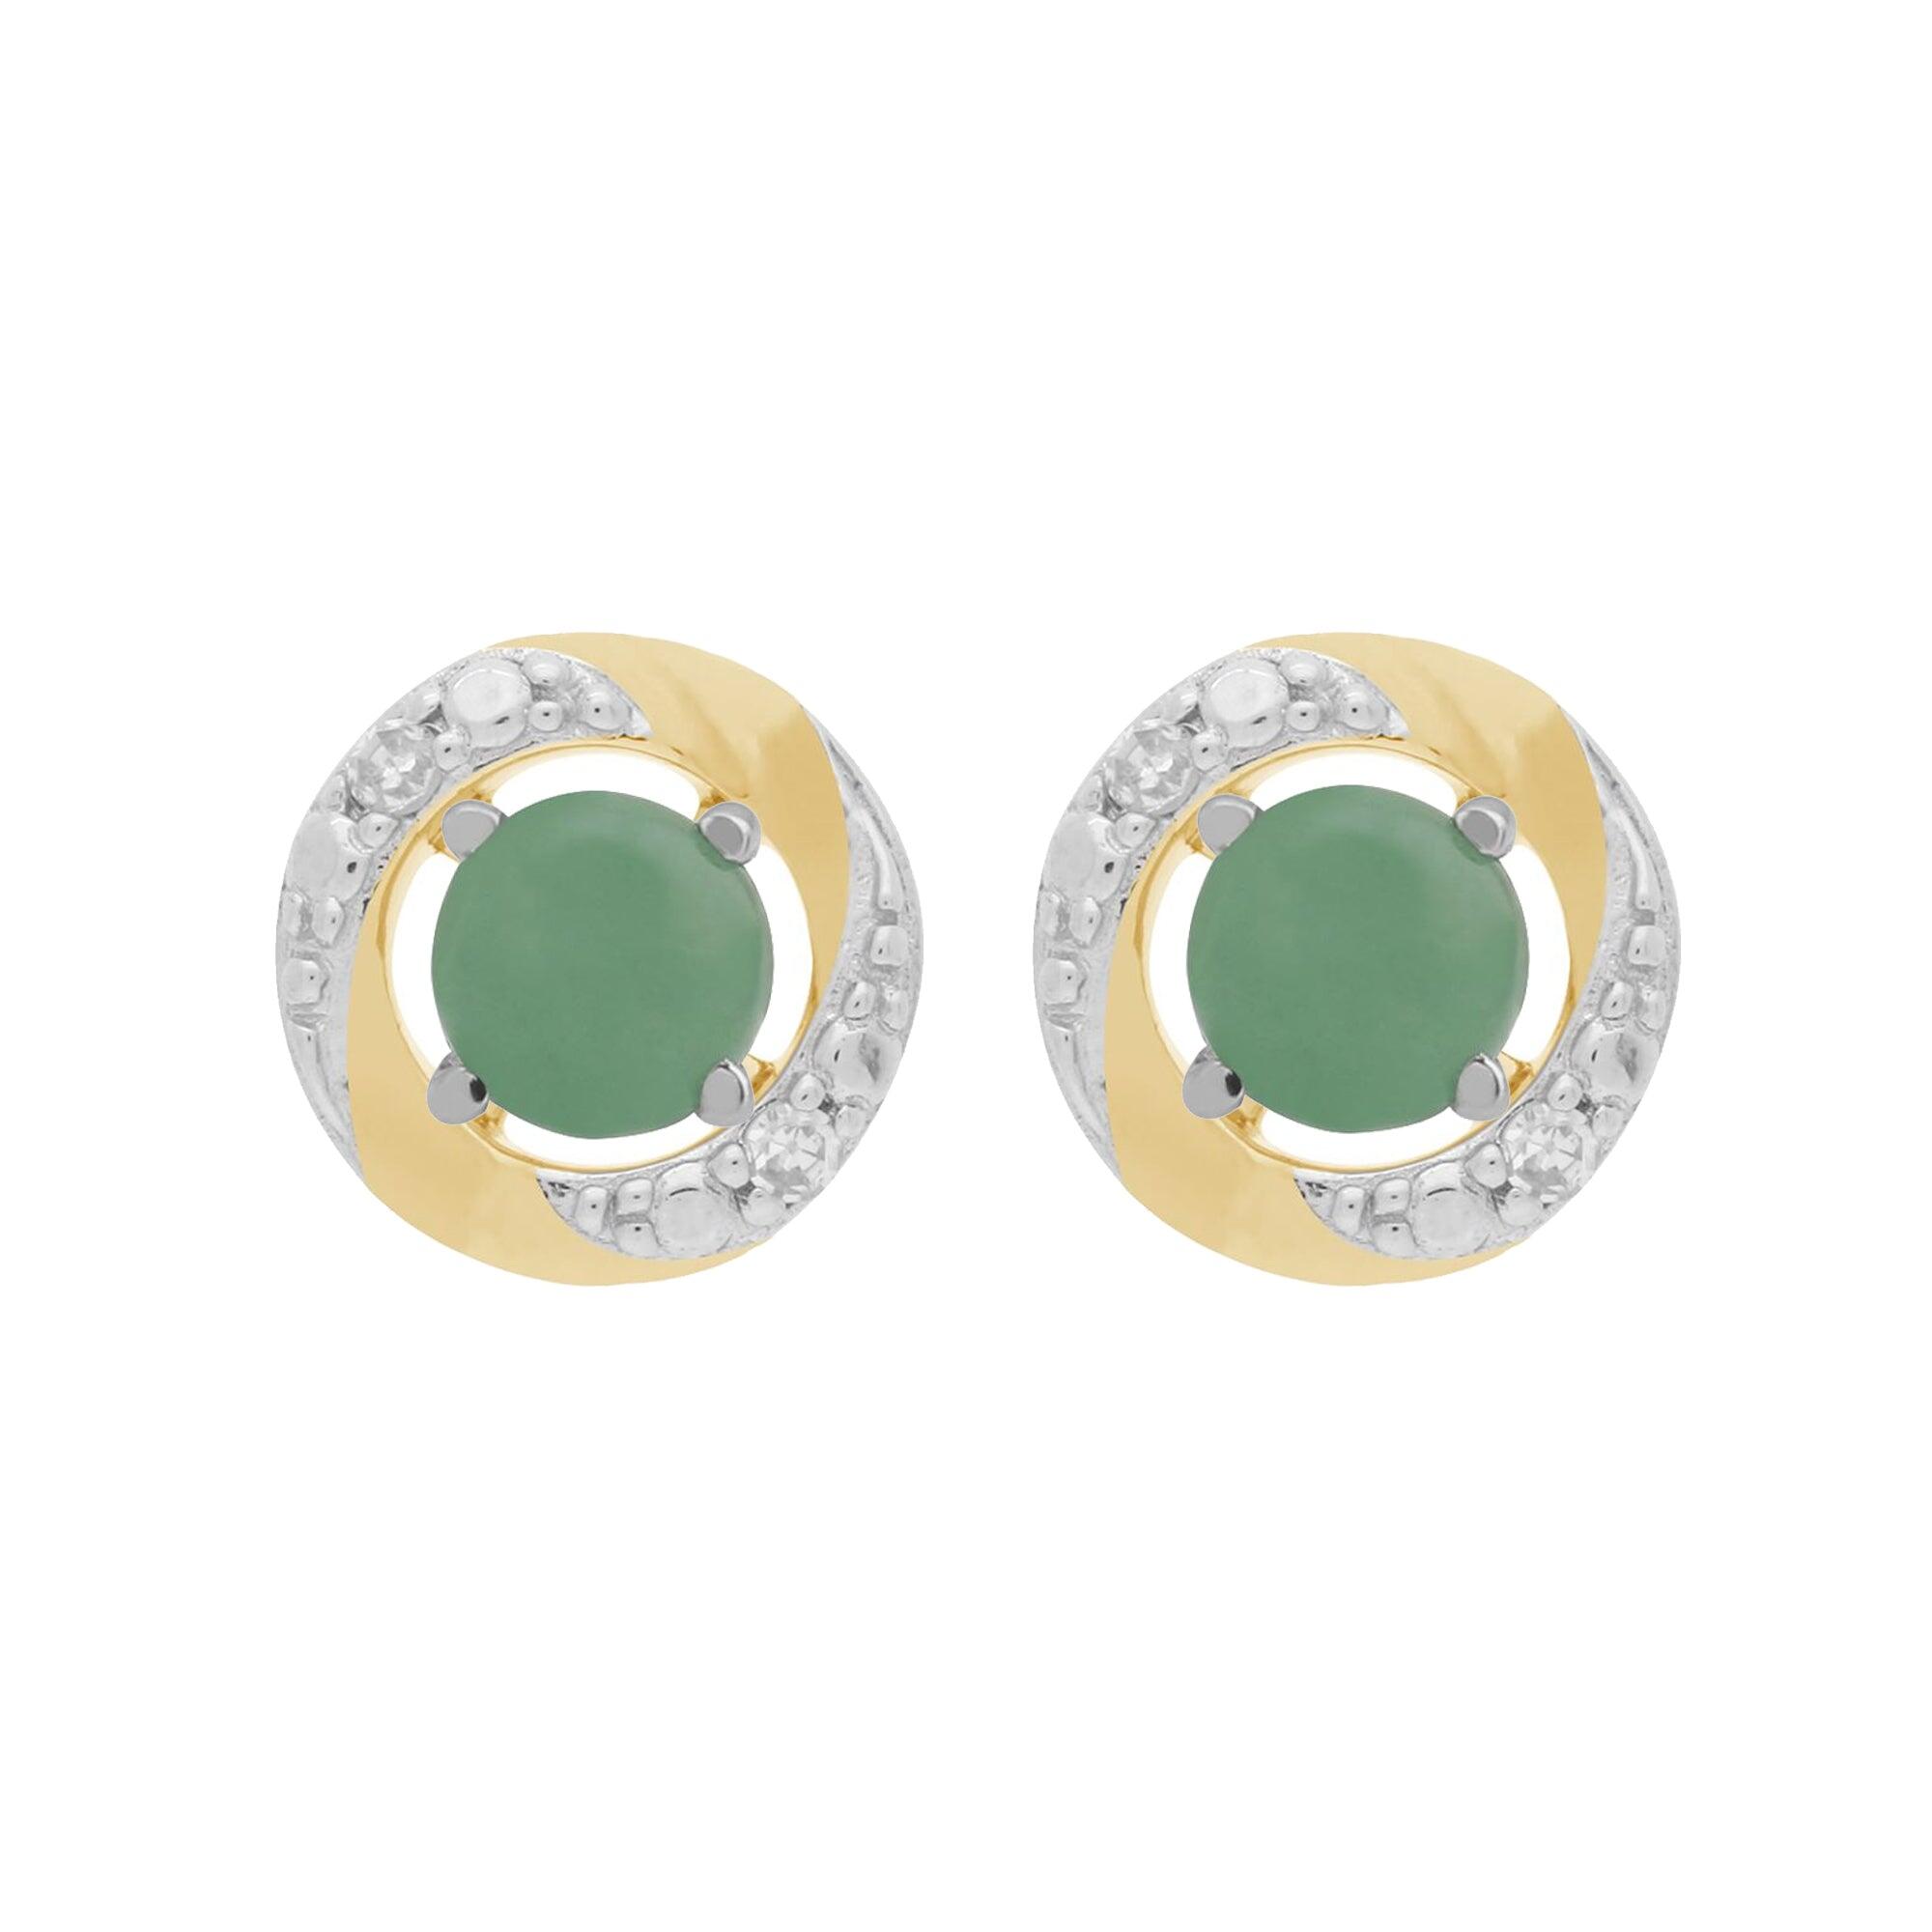 9ct White Gold Jade Stud Earrings with Detachable Diamond Halo Ear Jacket in 9ct Yellow Gold